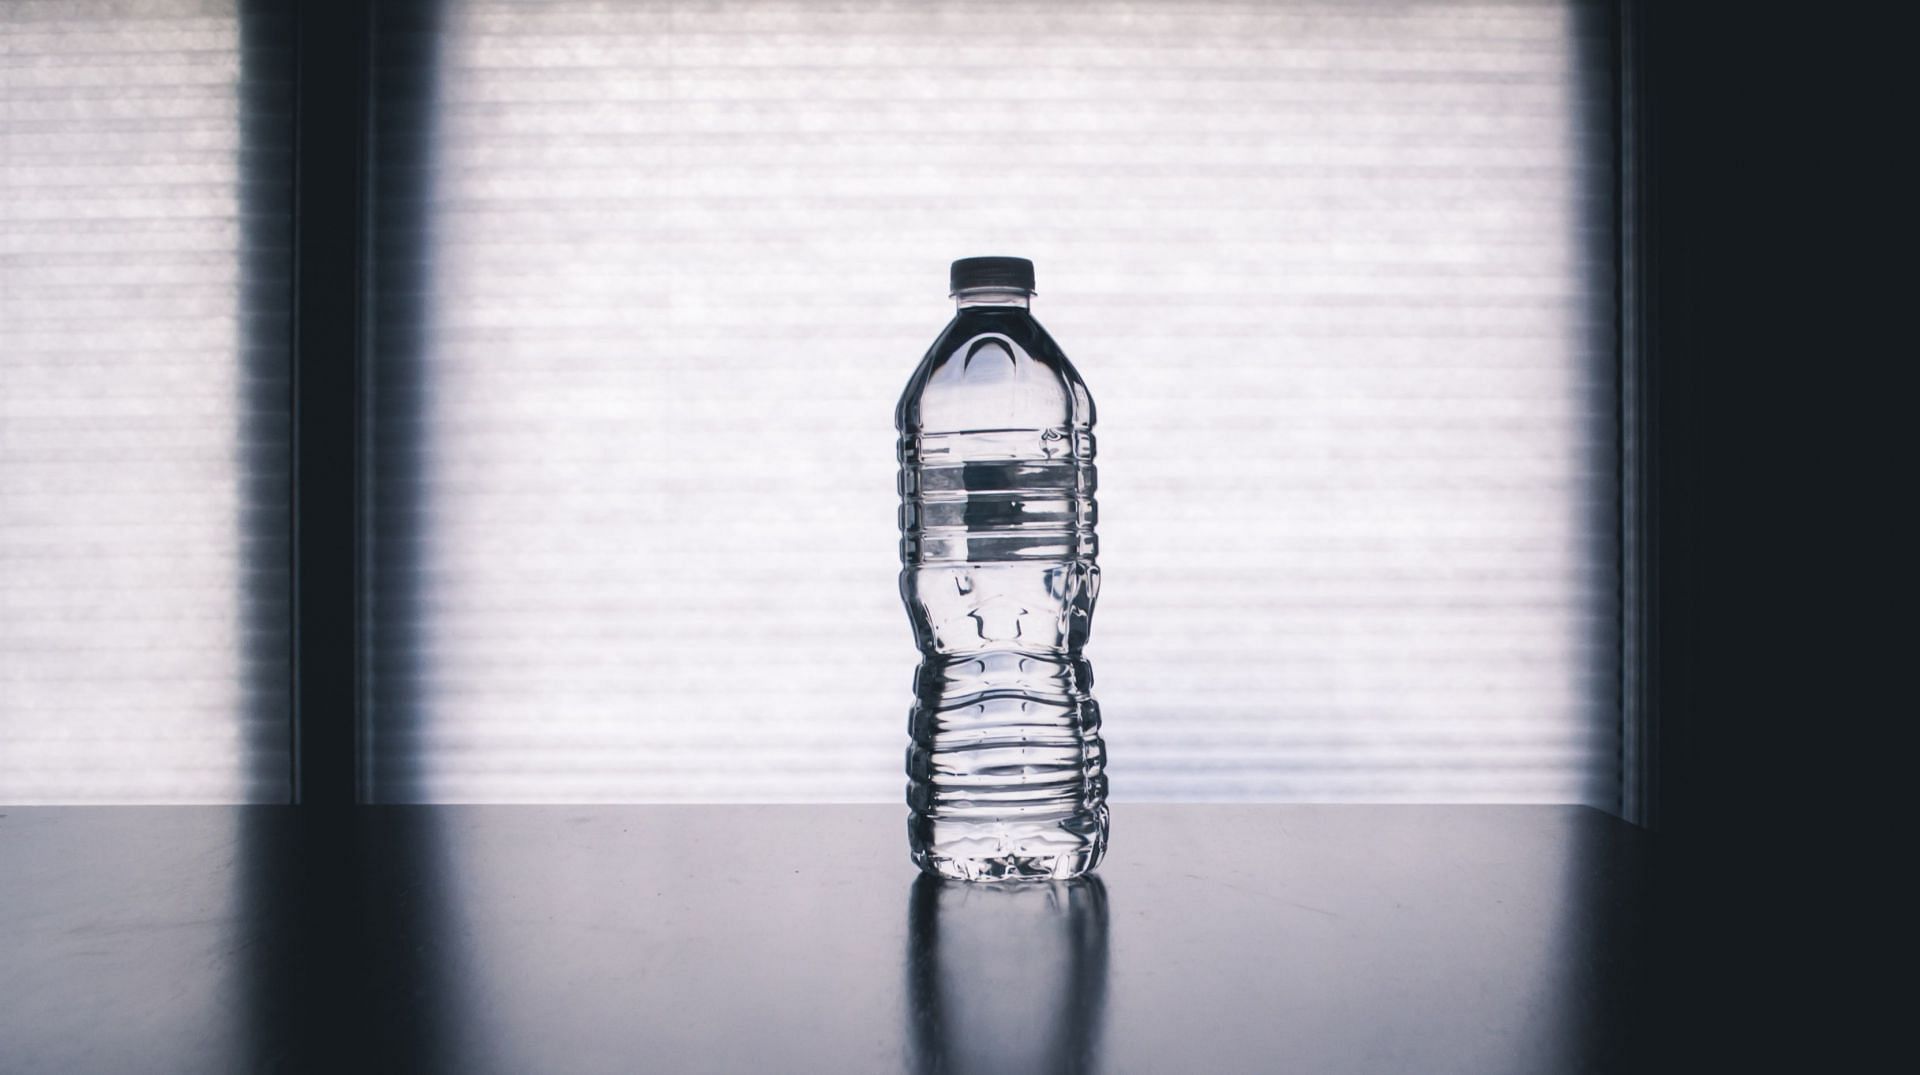 Water fasting can flush out toxins from the body (Image via Unsplash/Steve Johnson)